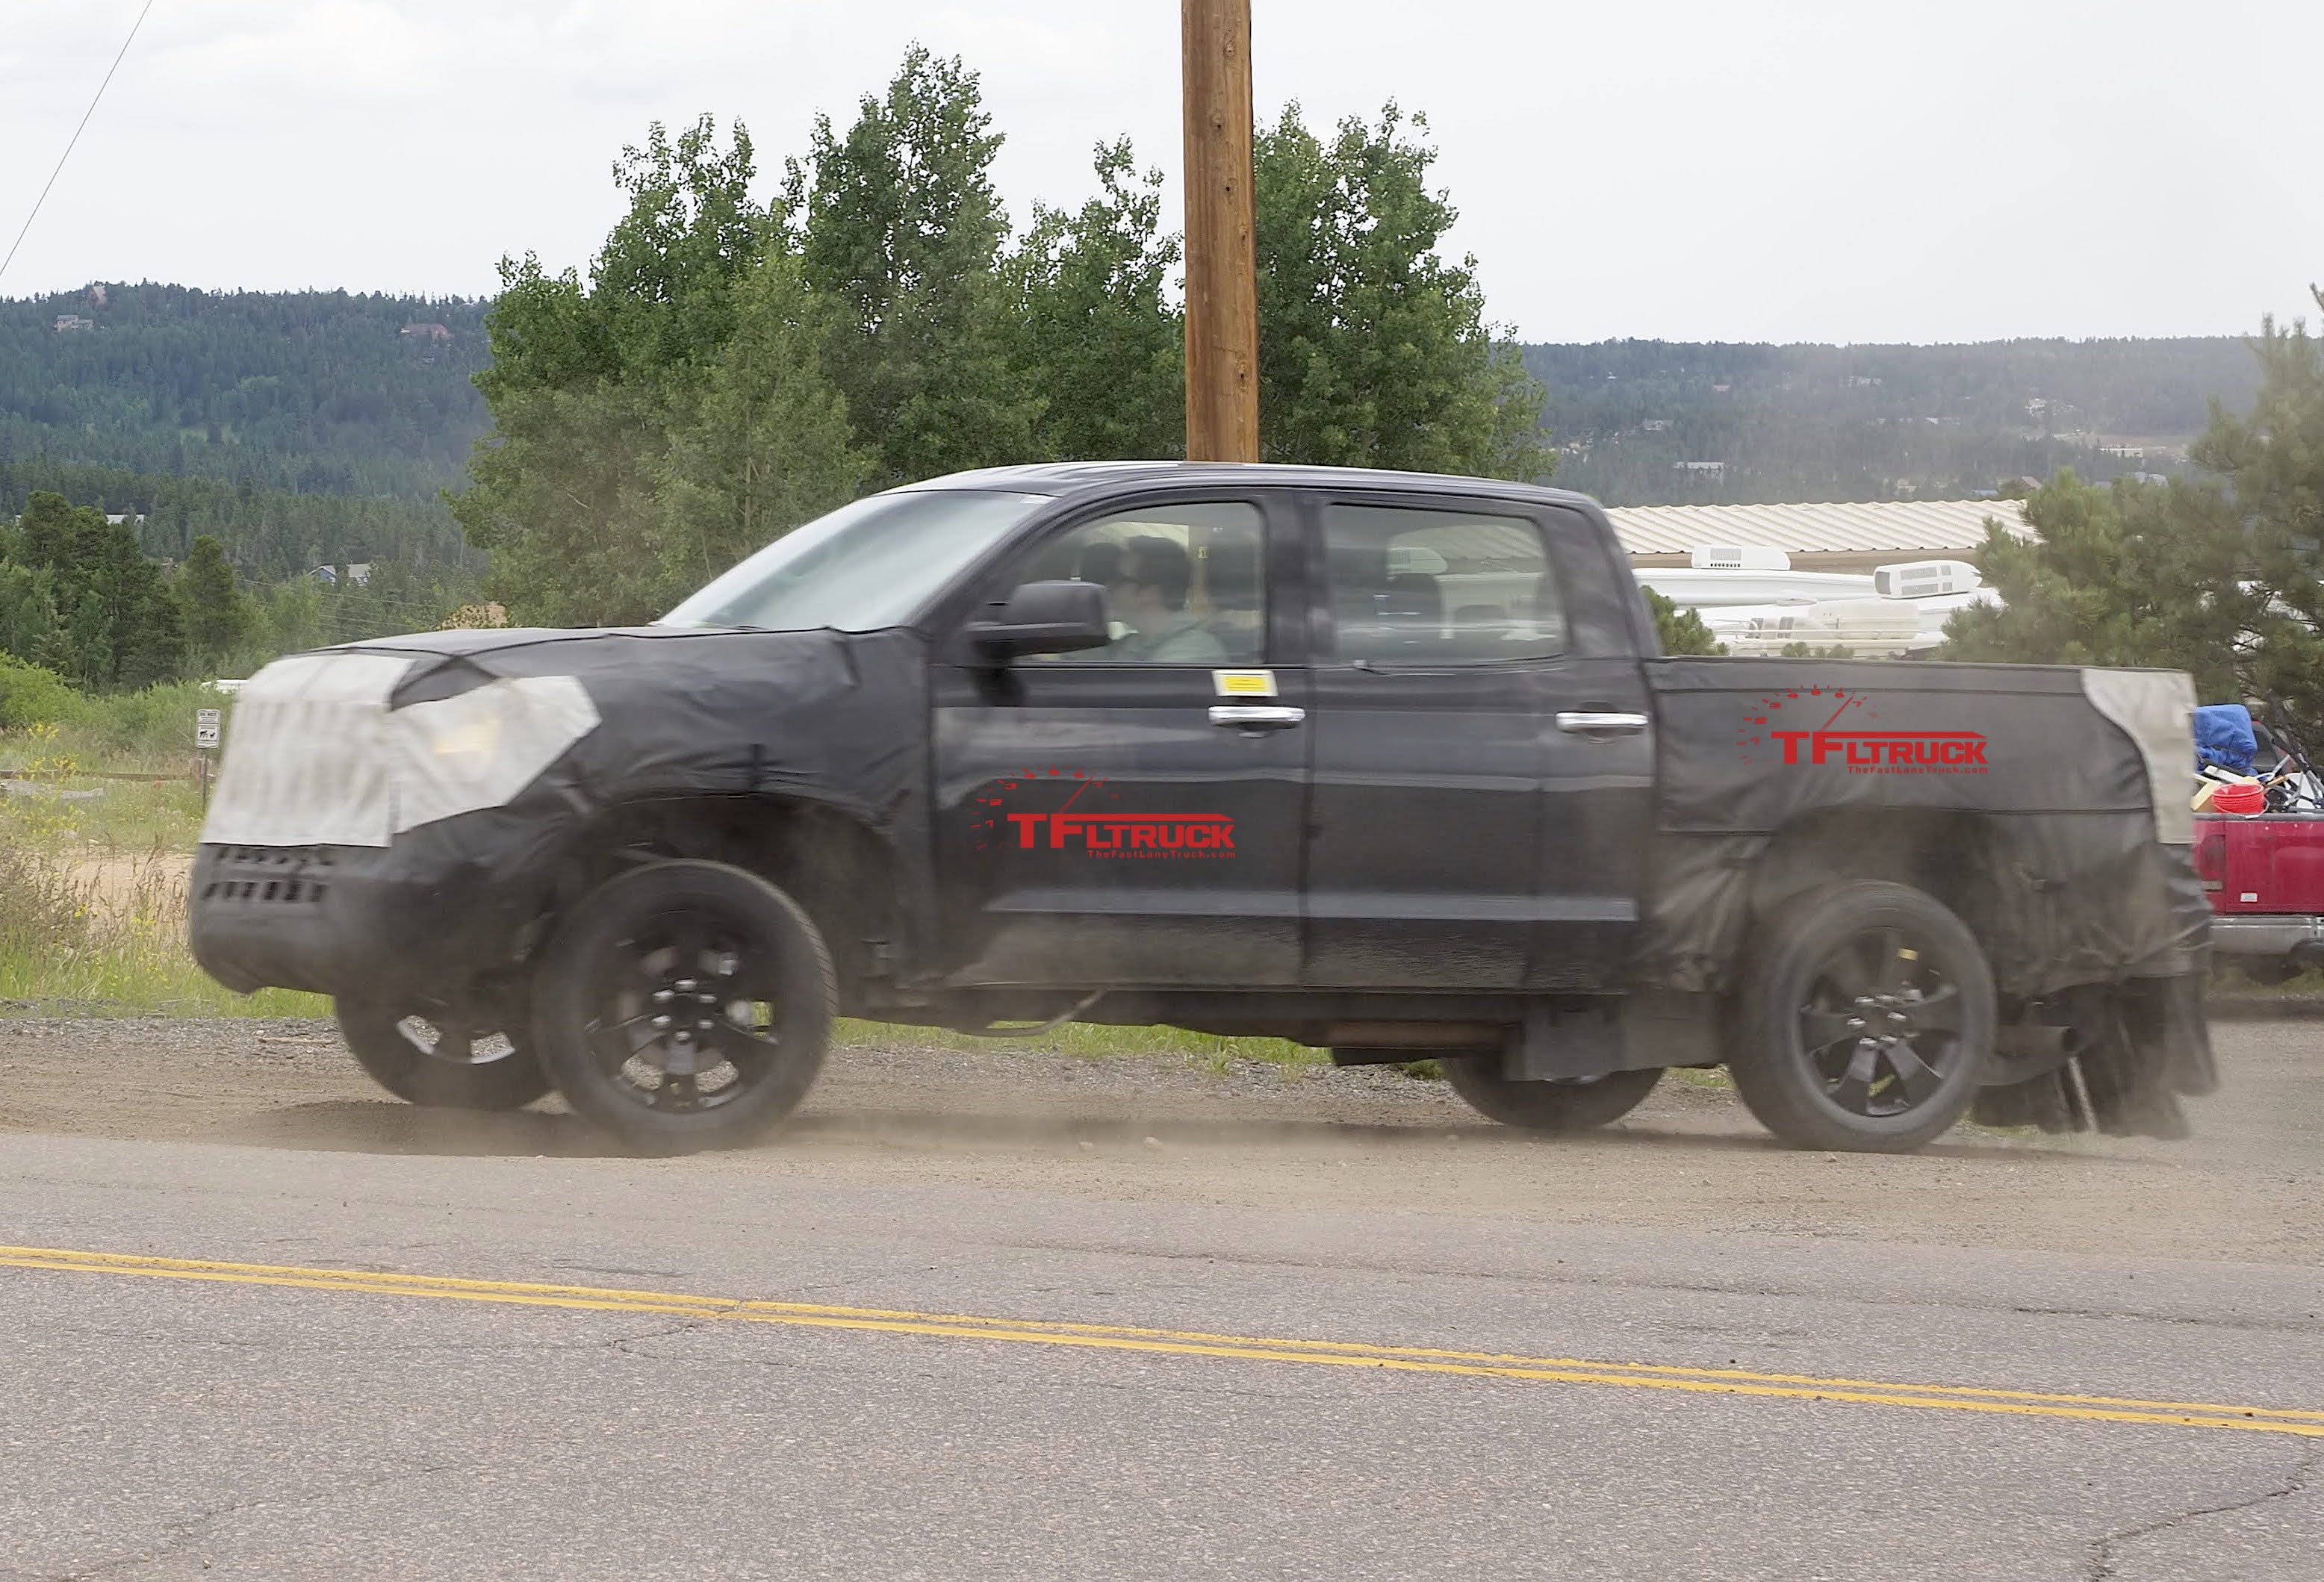 Report 2022 Toyota Tundra The New Tundra May Be Coming Later